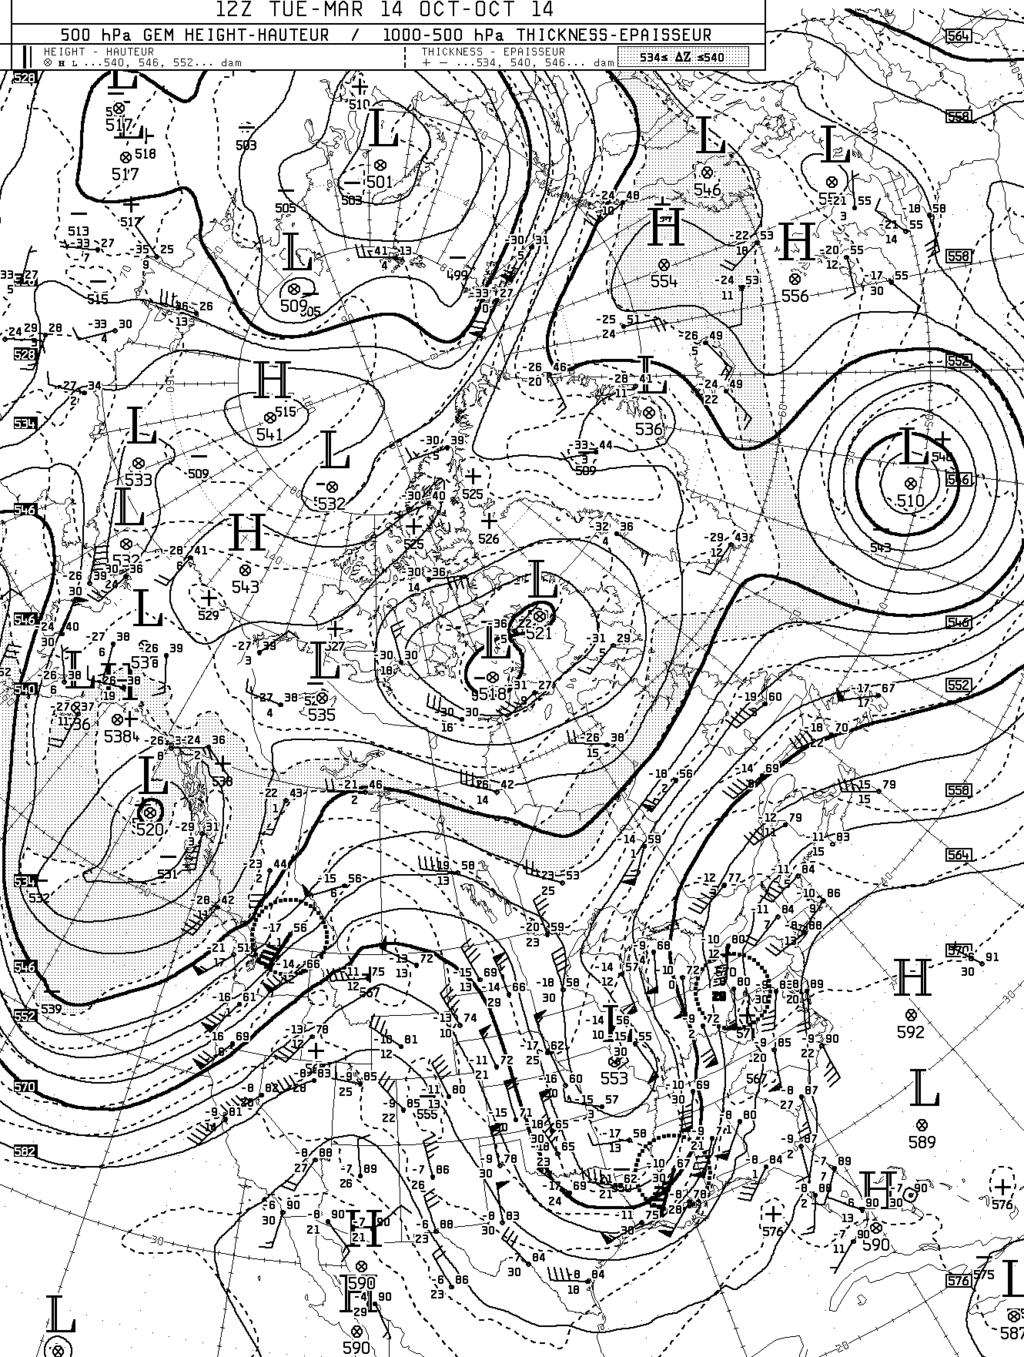 Tuesday October 14, 2014 500mb 1. Sketch in rough location of polar jet using a solid line or arrows 2.